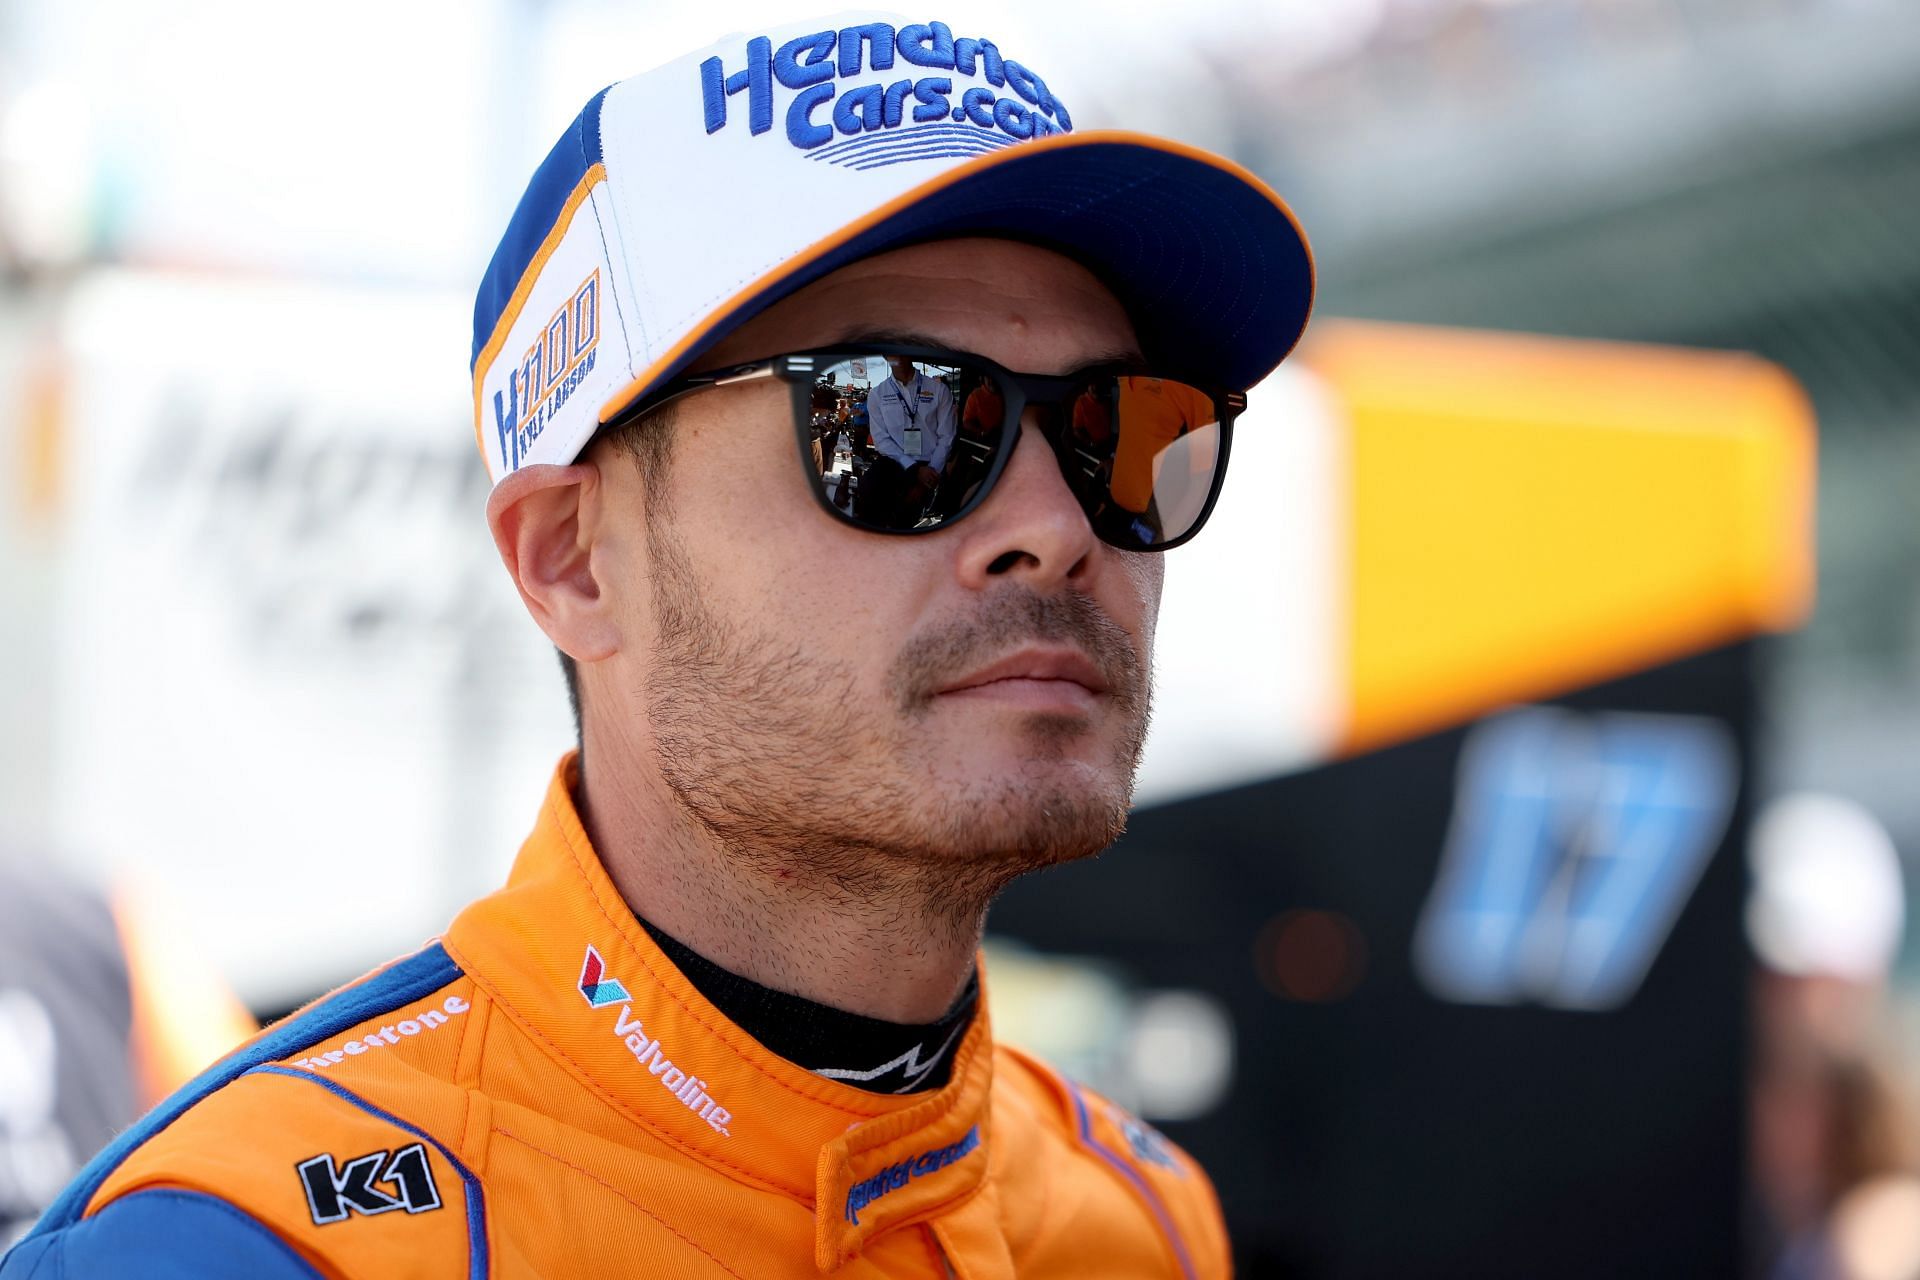 HMS' Kyle Larson reveals prerace thoughts ahead of Indy 500 double